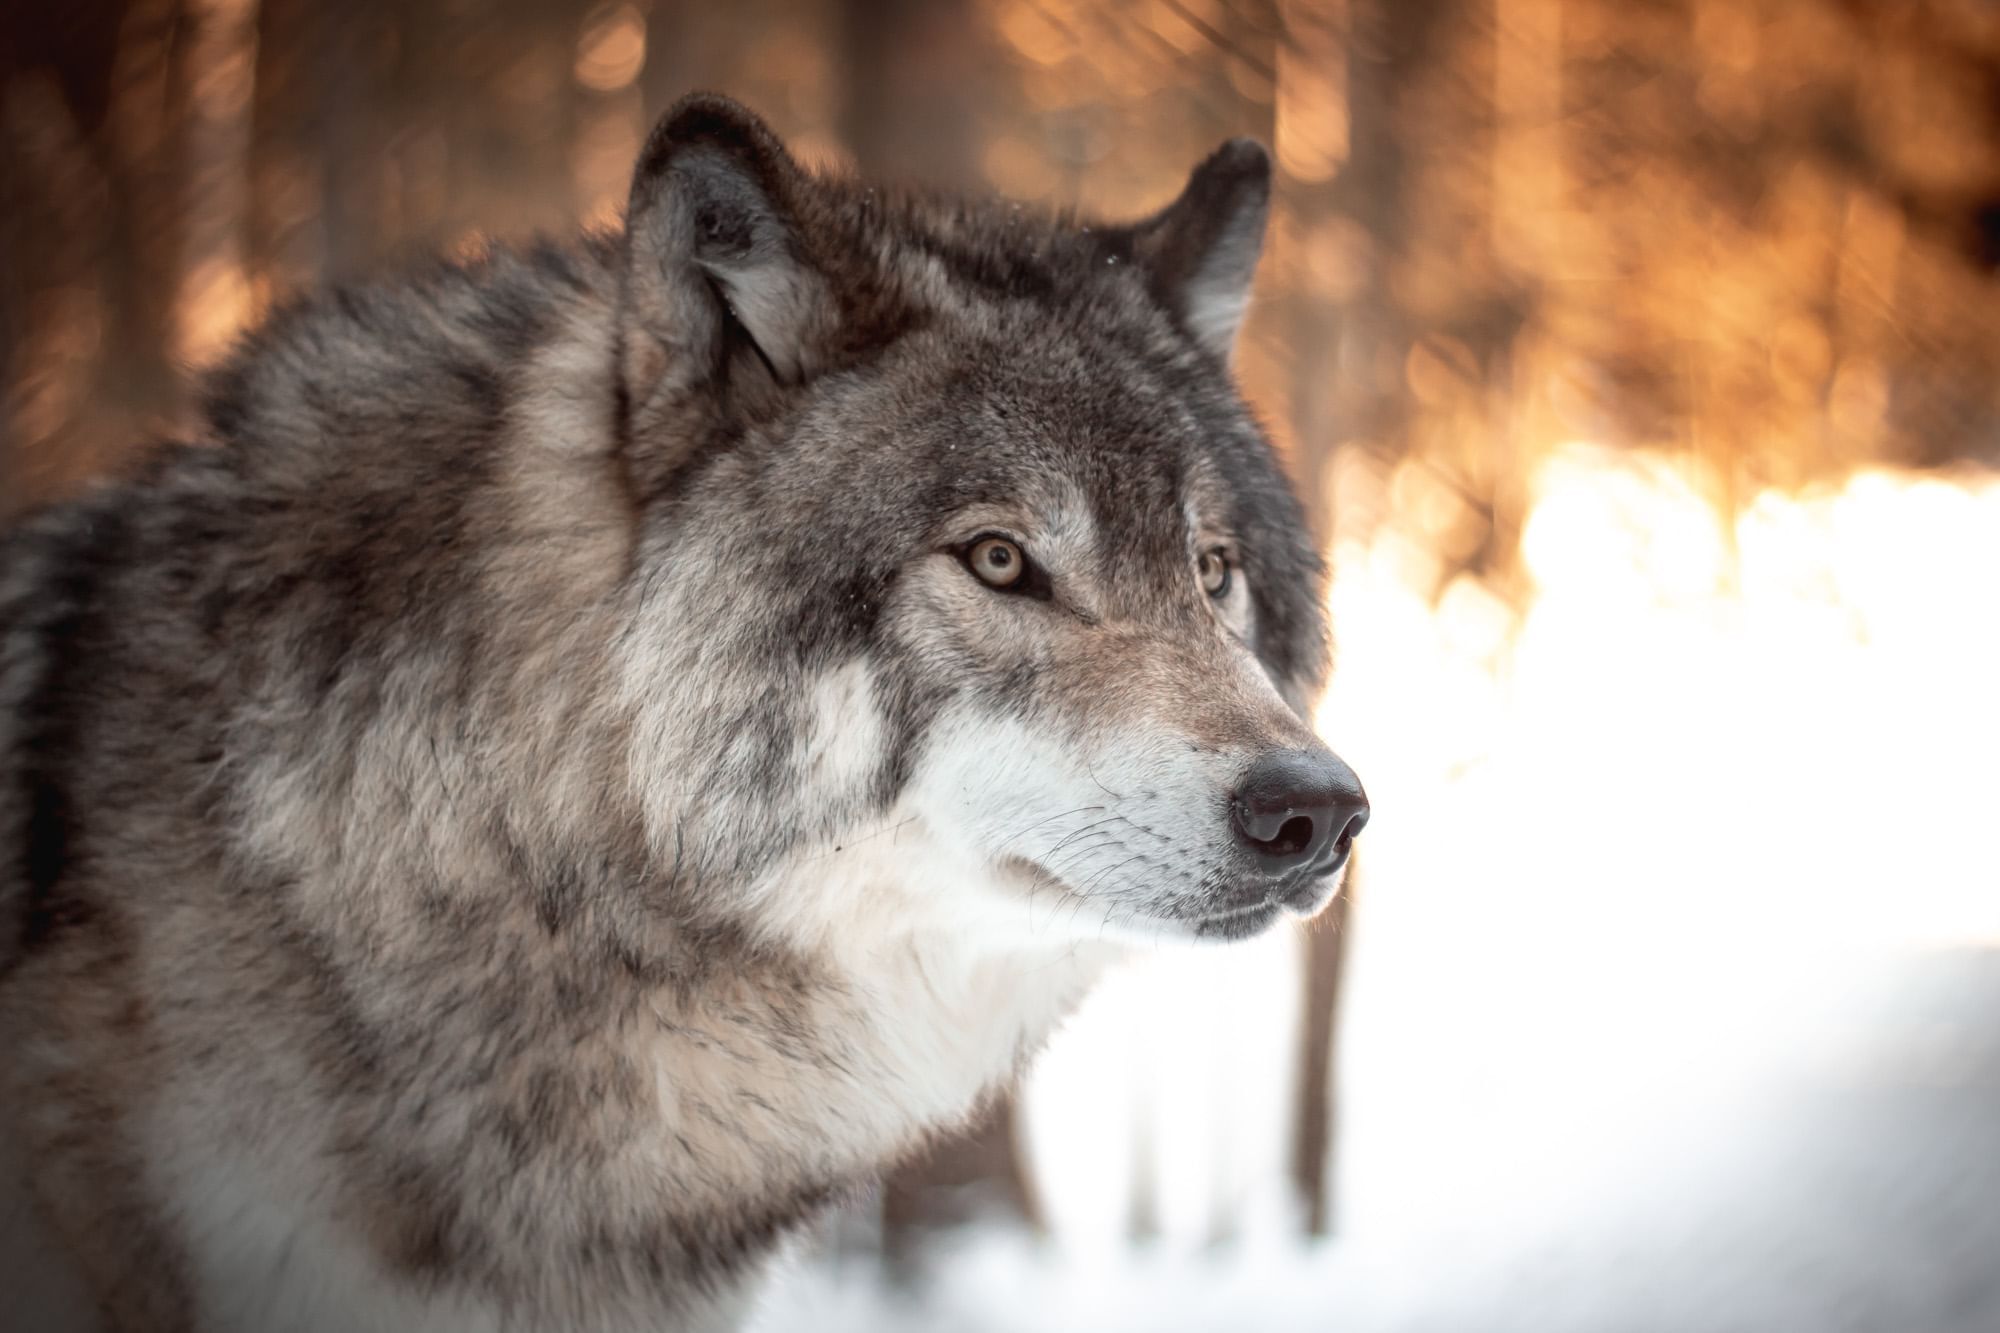 We can recommend a visit to Yamnuska Wolfdog Sanctuary